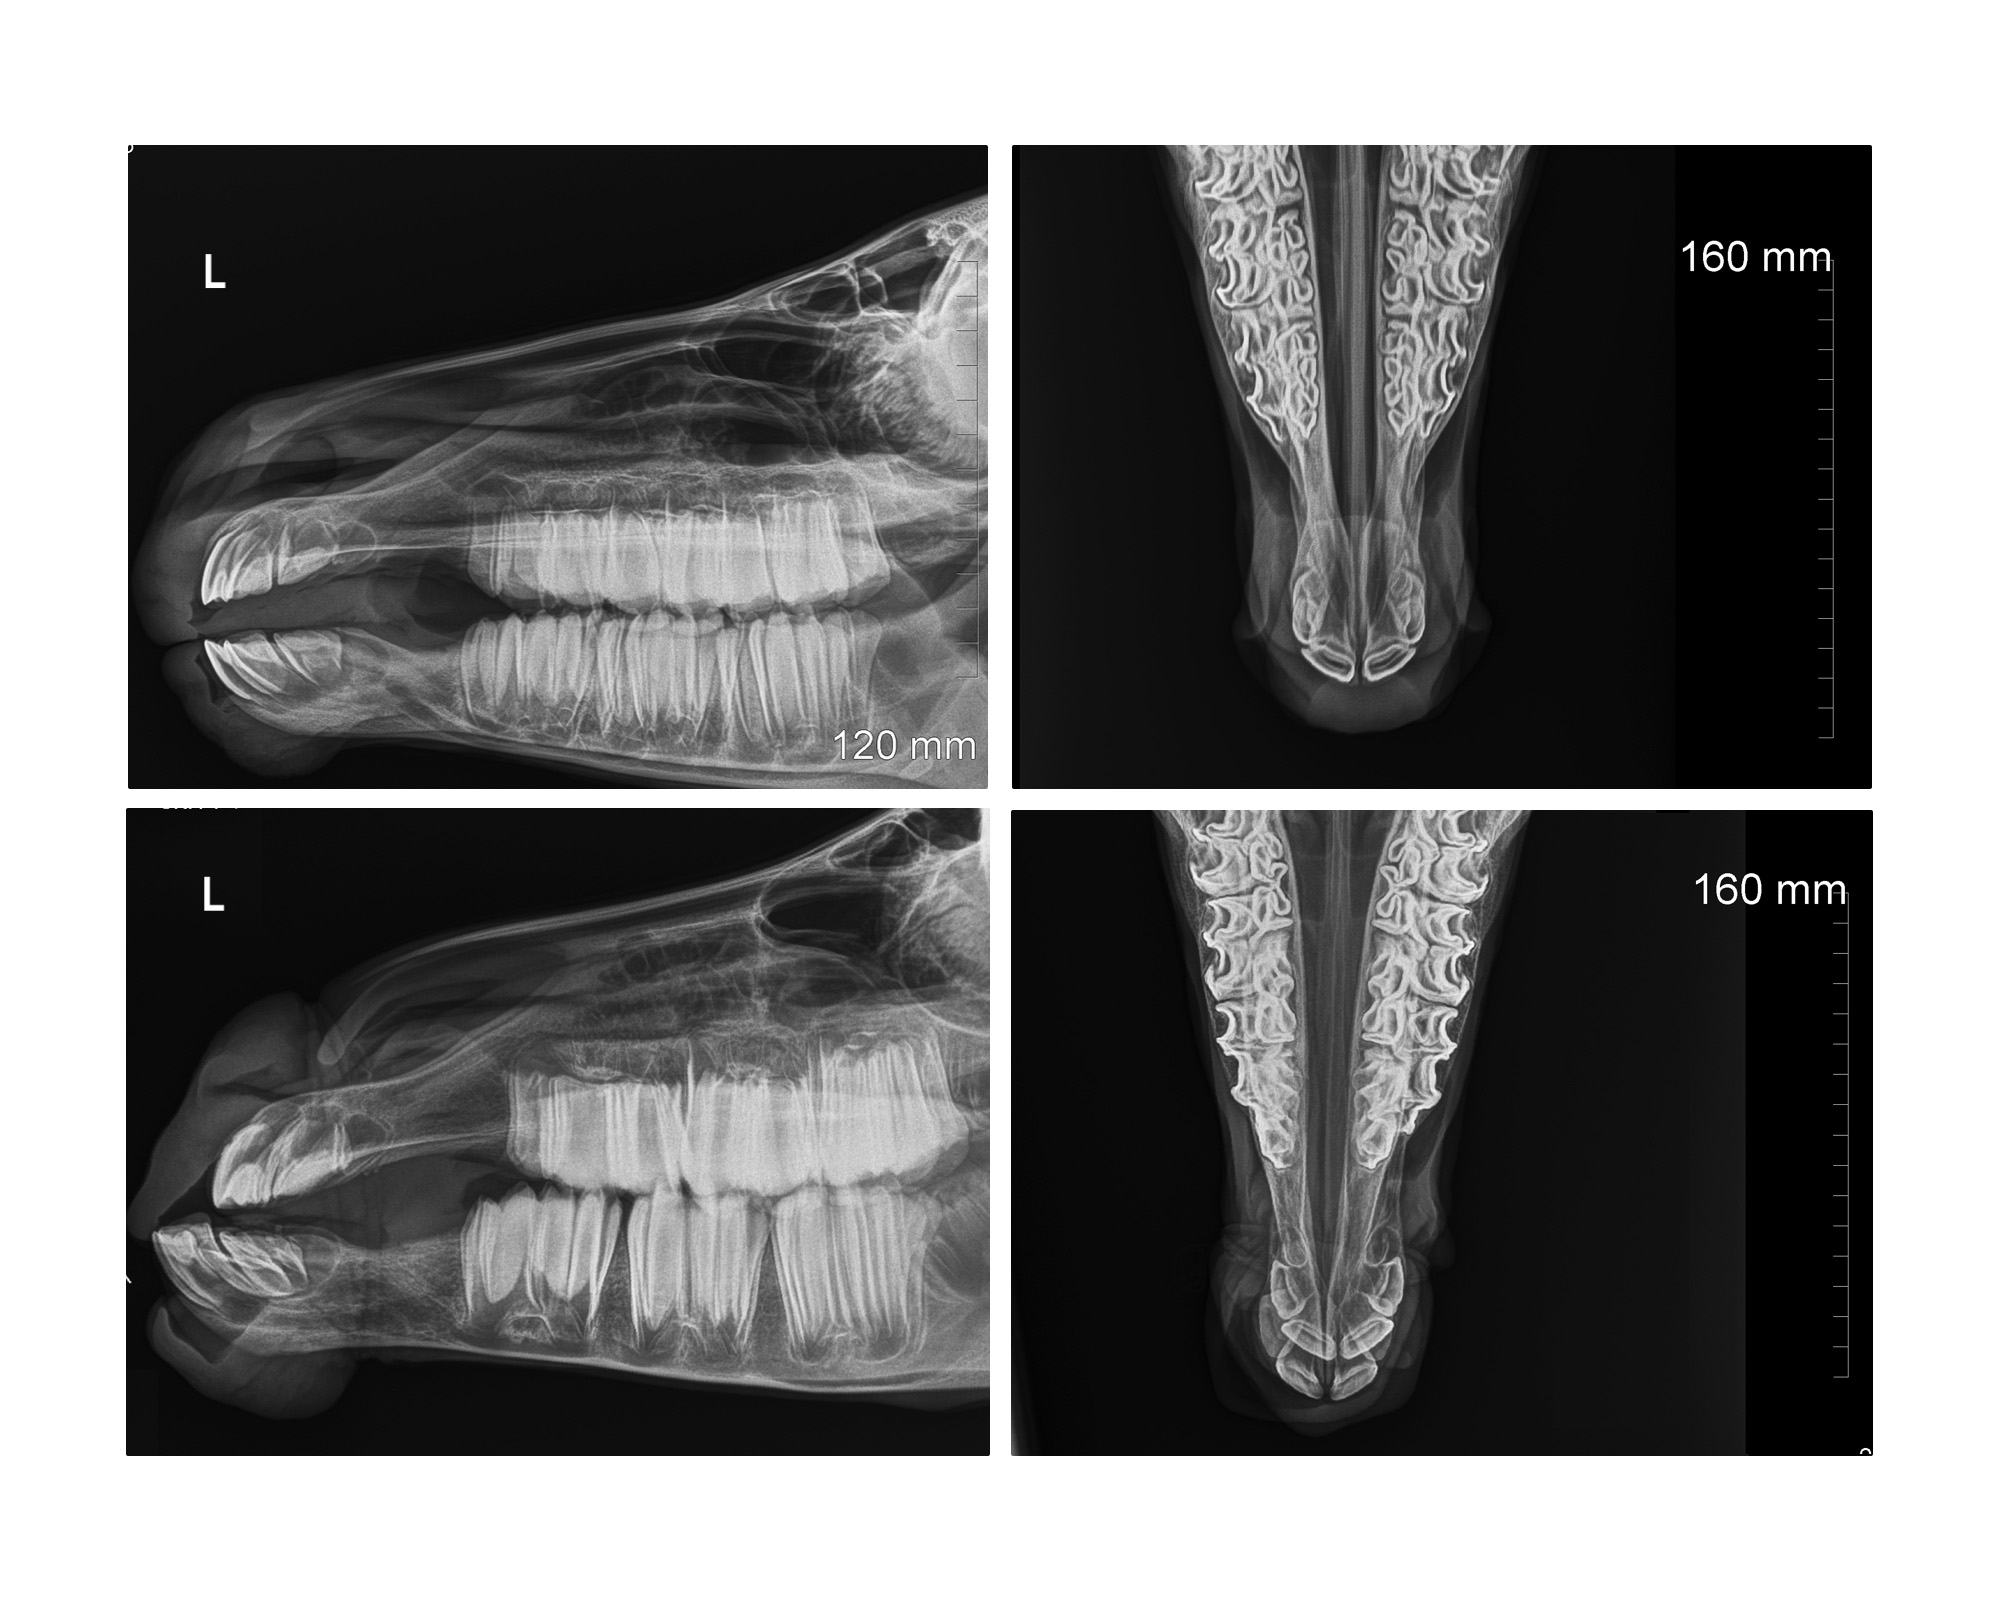 Mandible - top two images are from a healthy foal and bottom two from a CHDS foal. Both less than 1 week of age. 